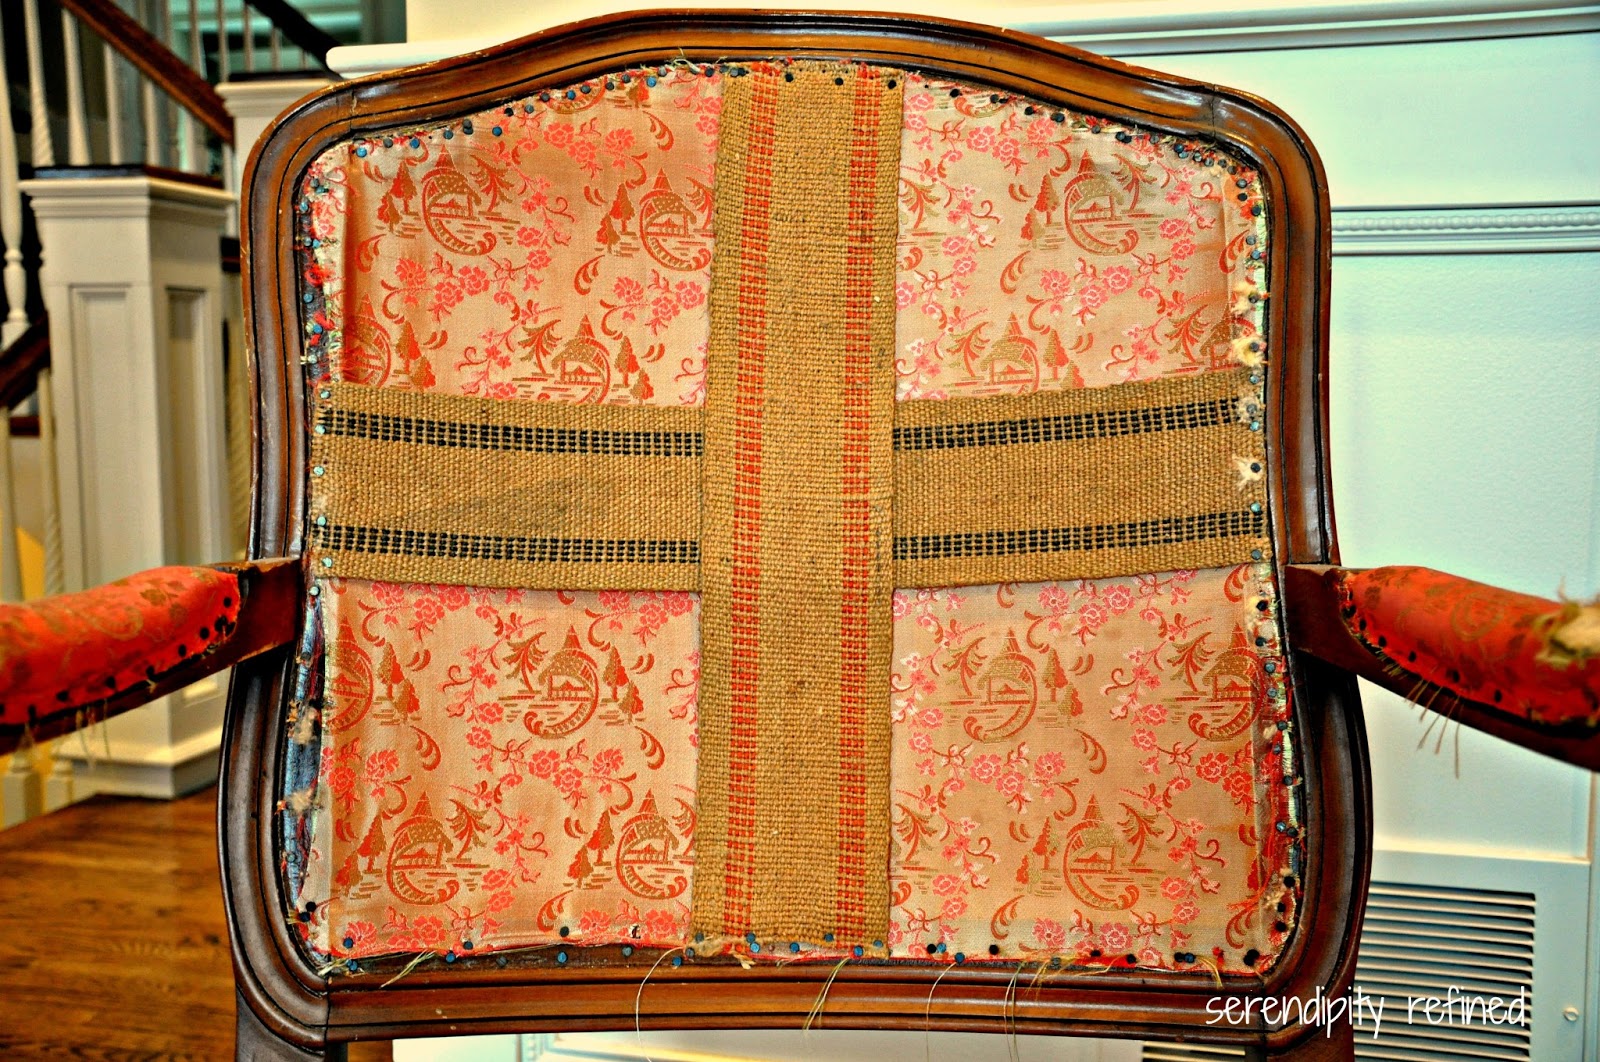 How to Paint Upholstery - Antique Chair Makeover - Midcounty Journal